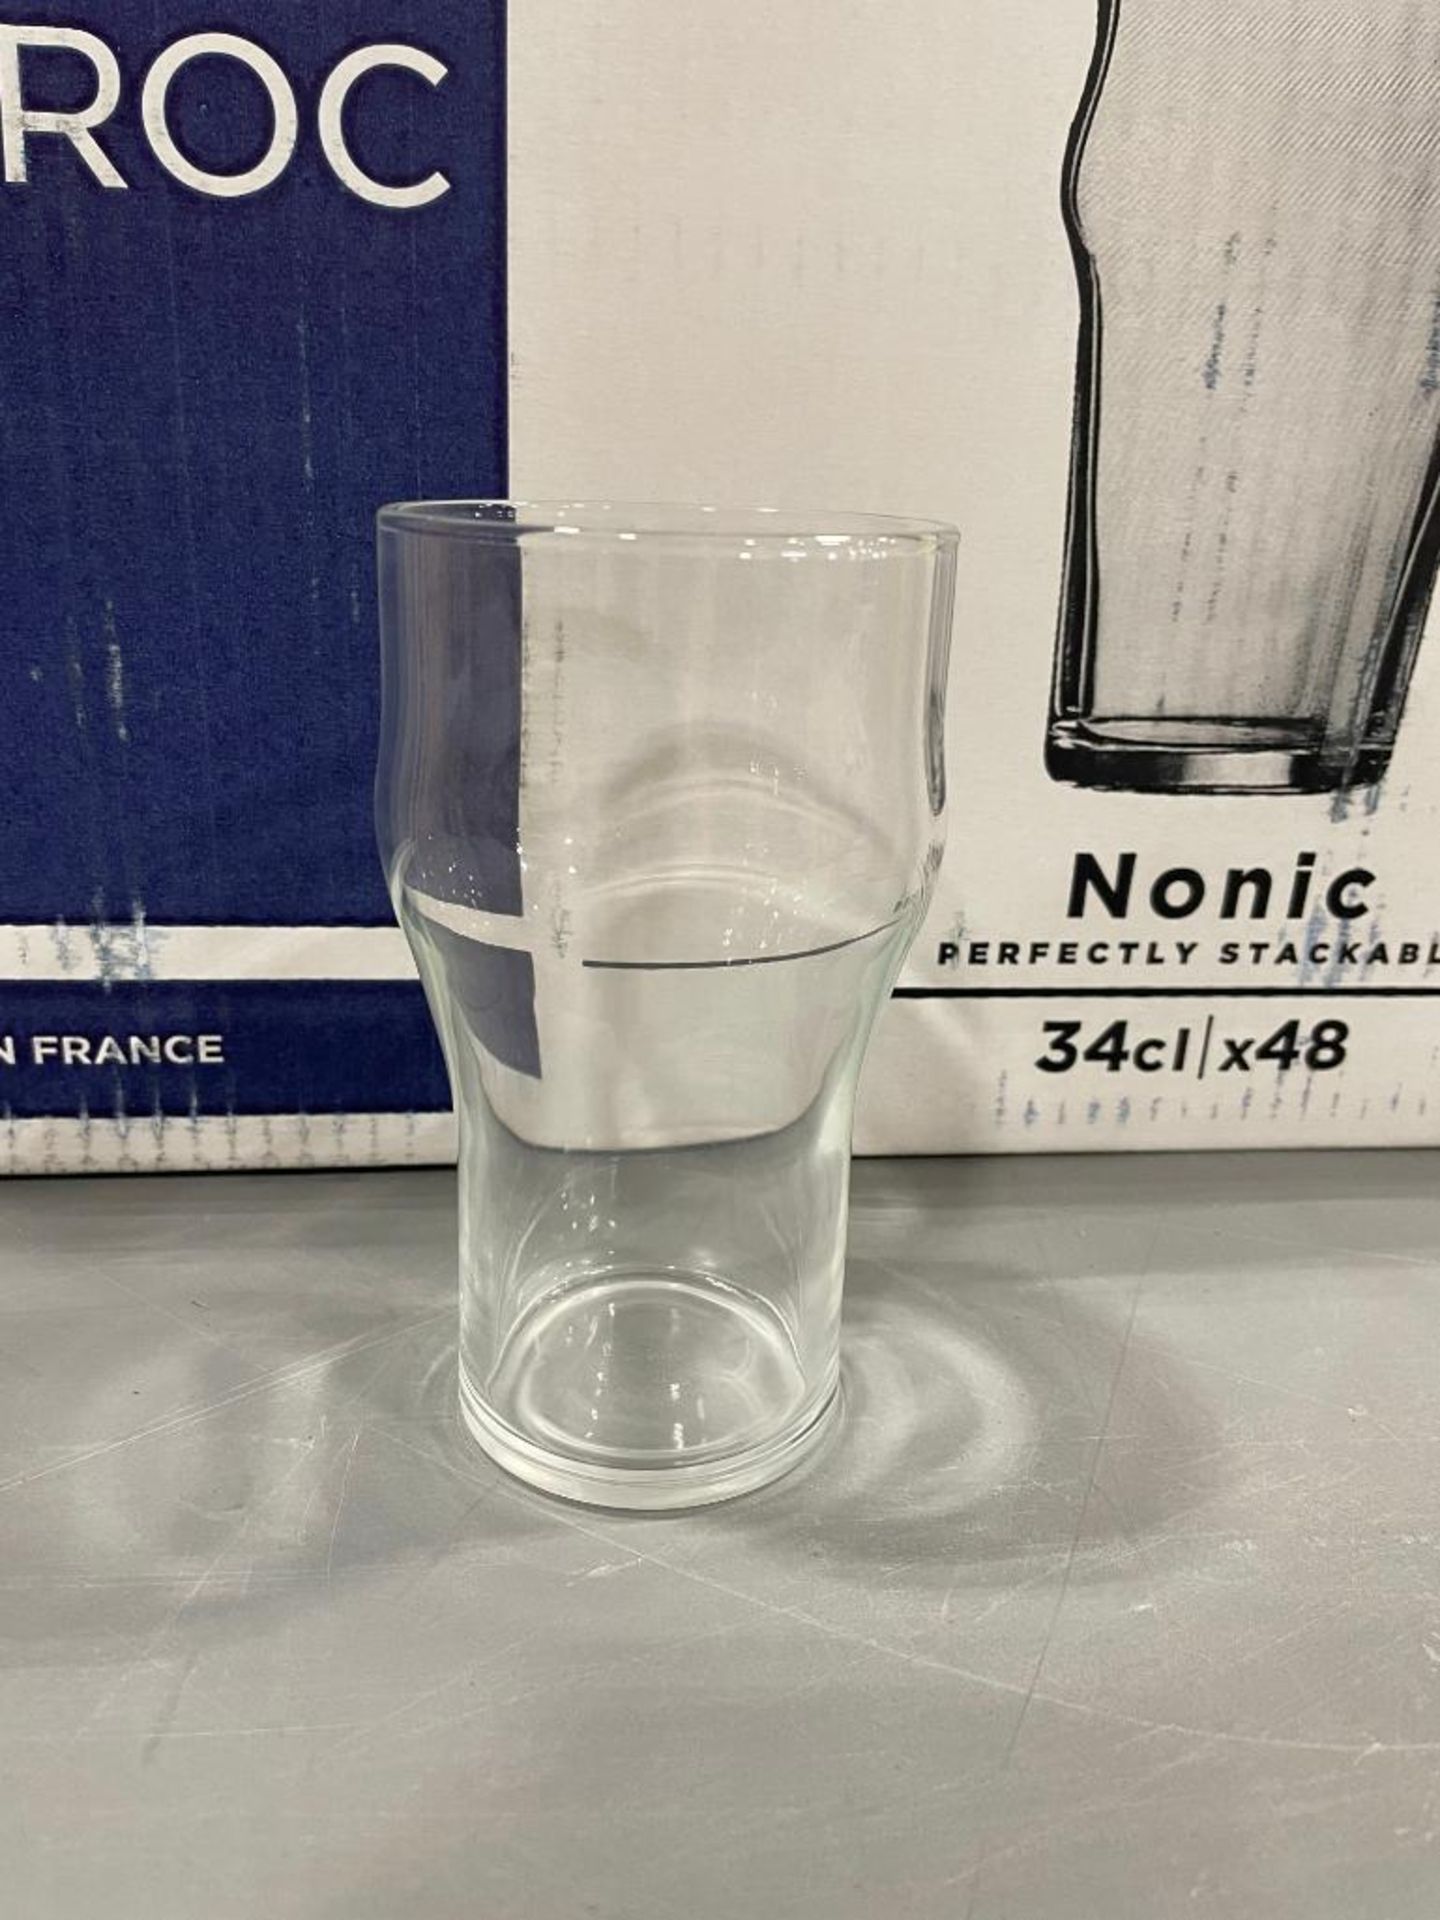 2 CASES OF 12OZ NONIC BEER GLASS, ARCOROC 43740 - 24 PER CASE - Image 5 of 14